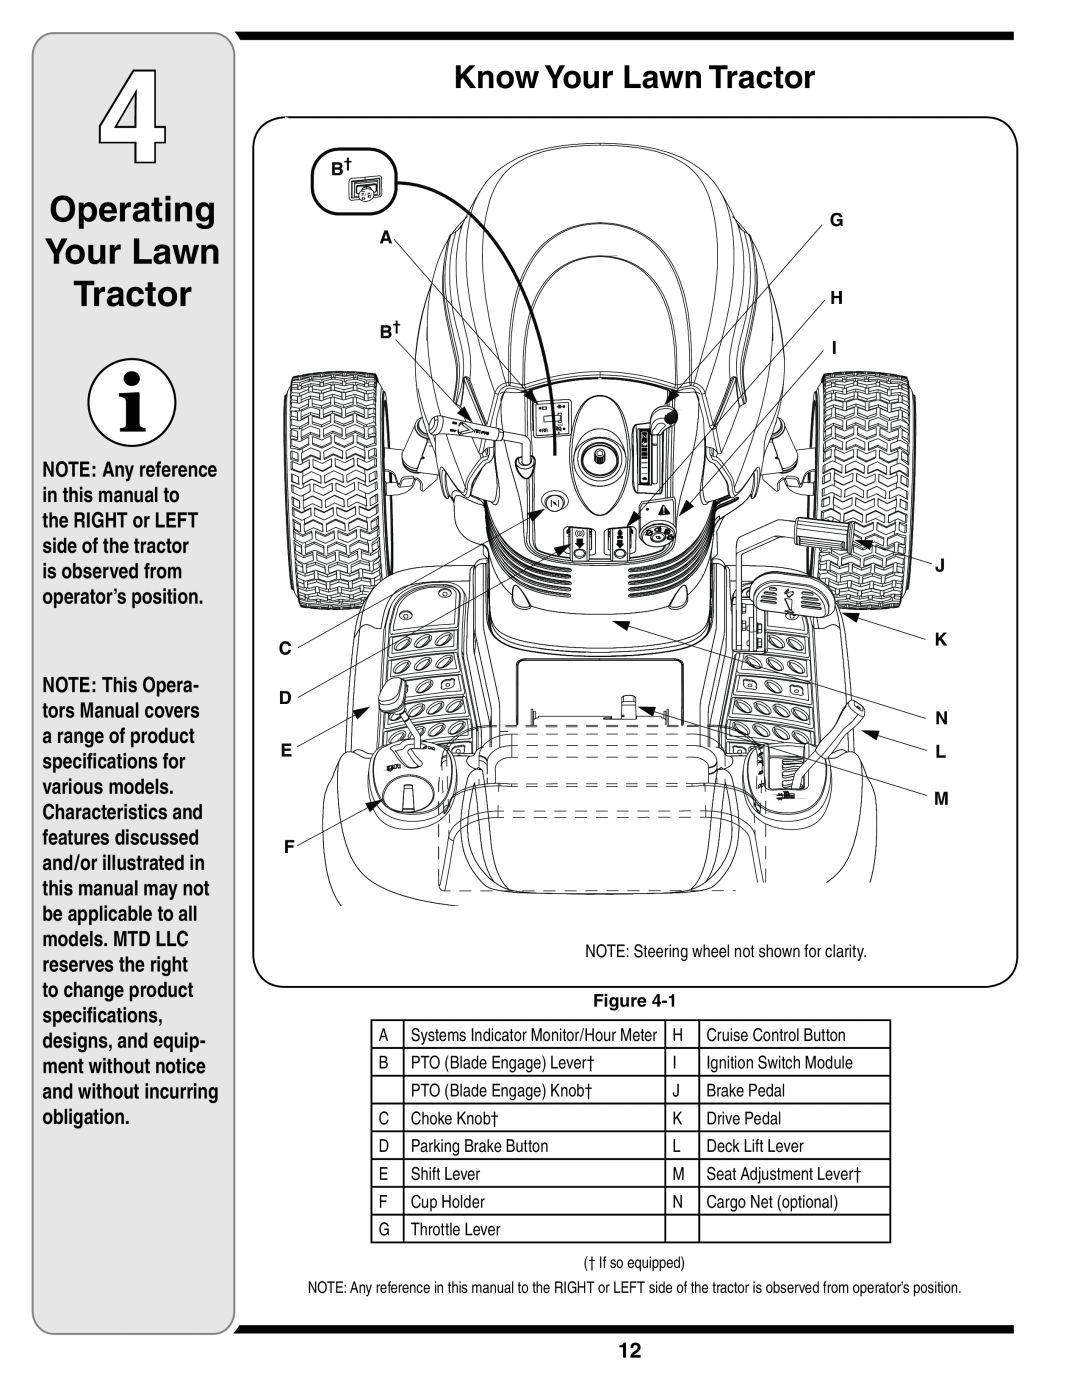 White Outdoor 606 manual Operating Your Lawn Tractor, Know Your Lawn Tractor, B† A B† C D E F, G H 